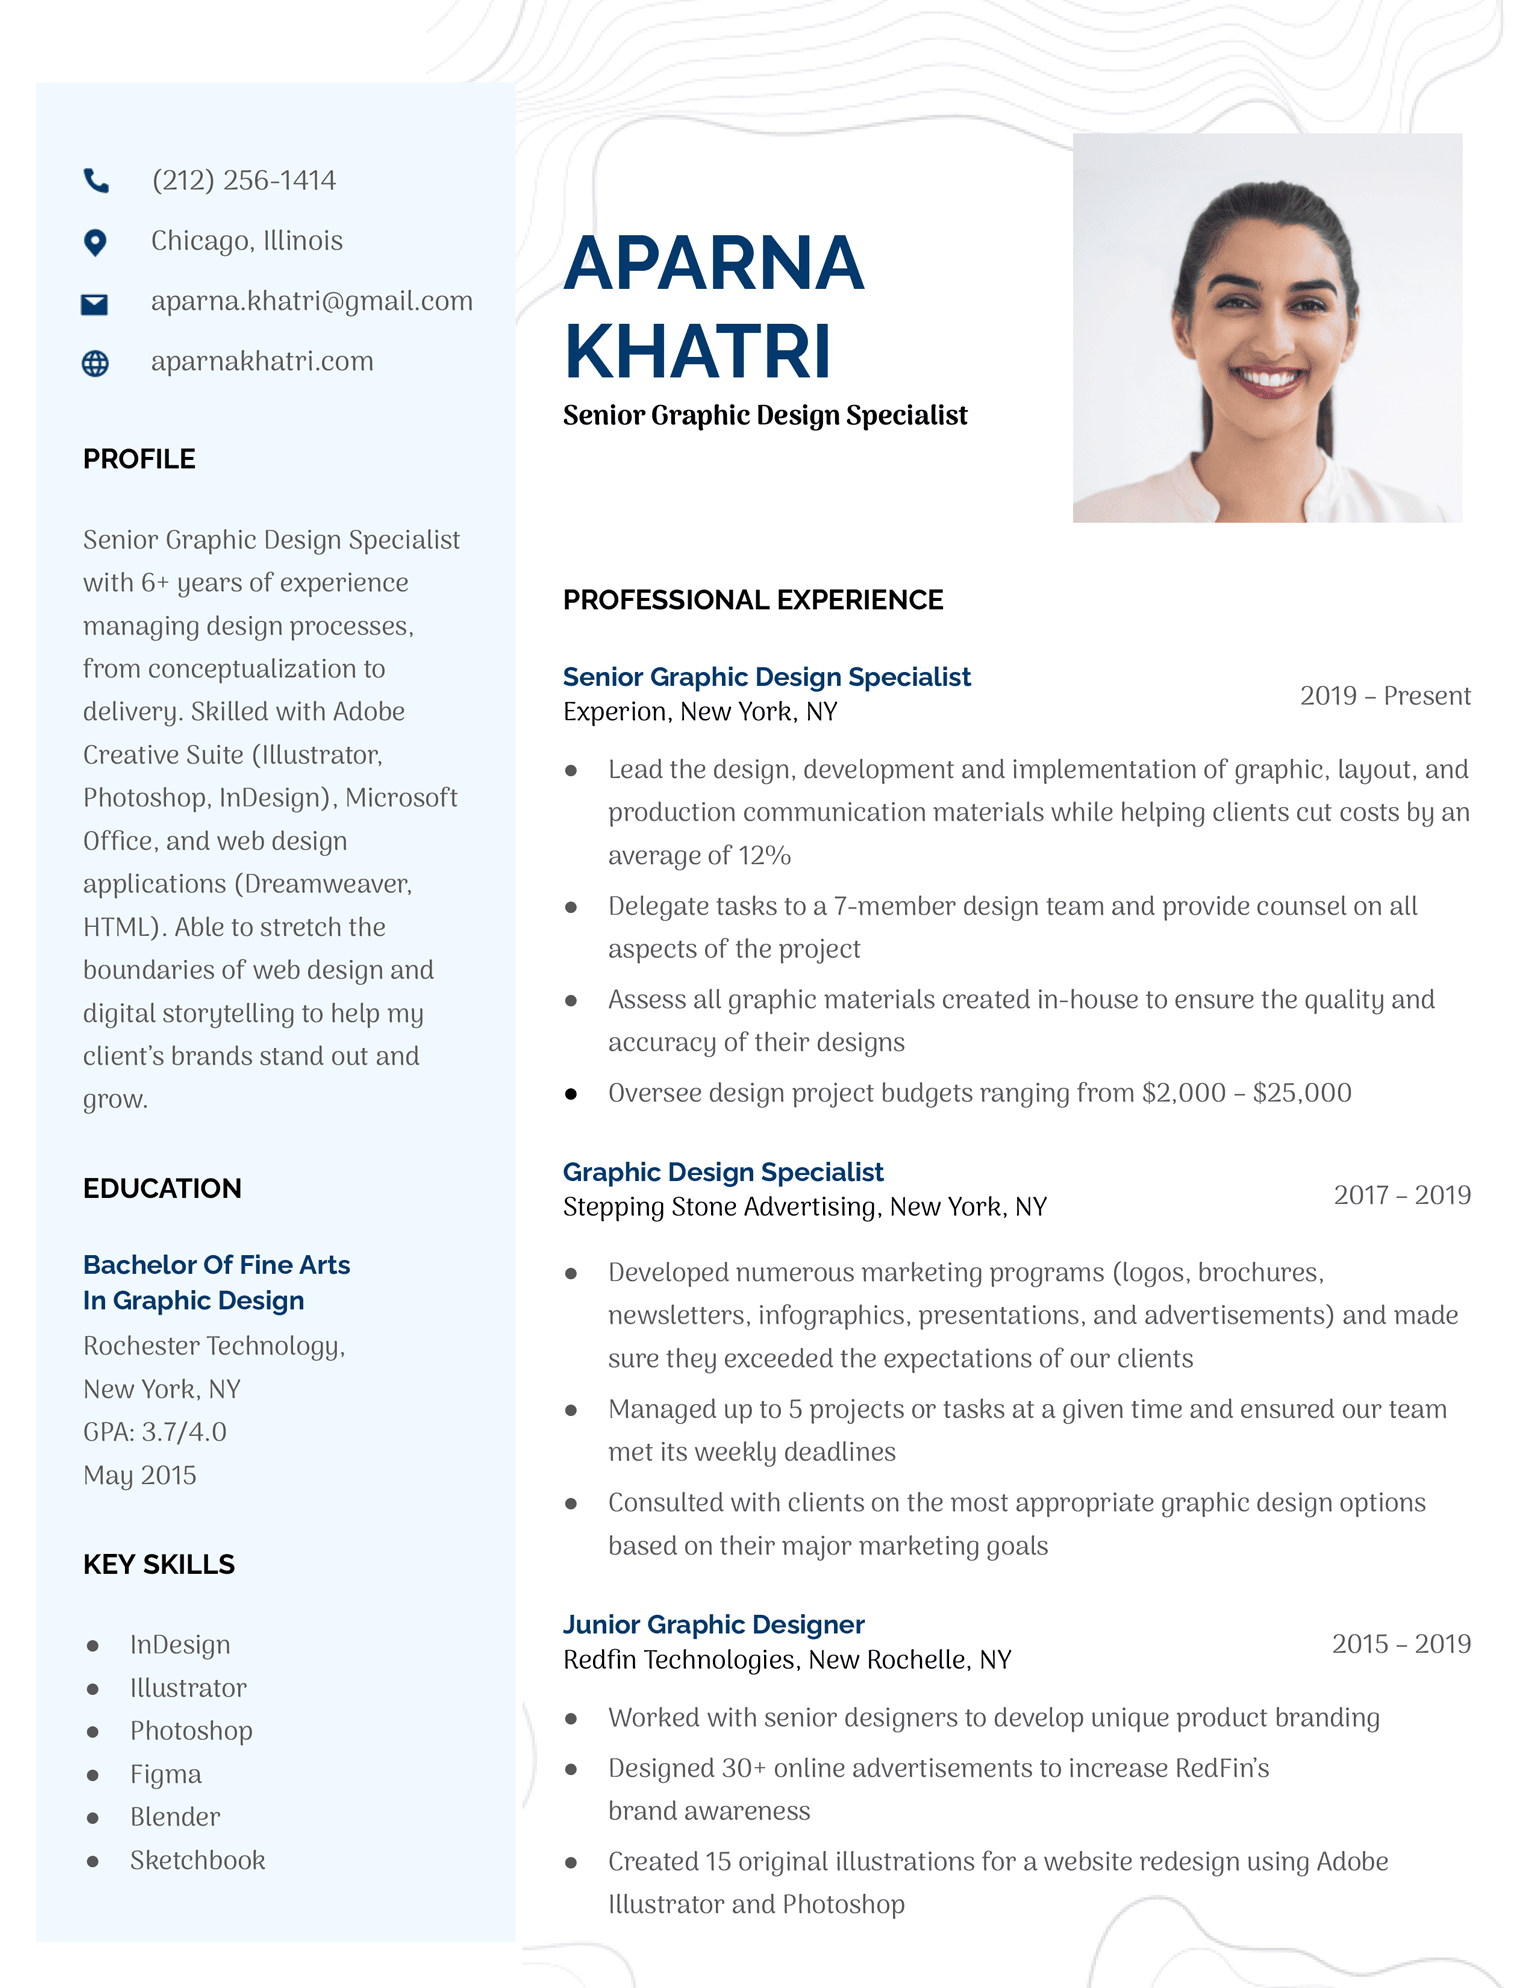 The Pastel resume template for Google Docs in blue.